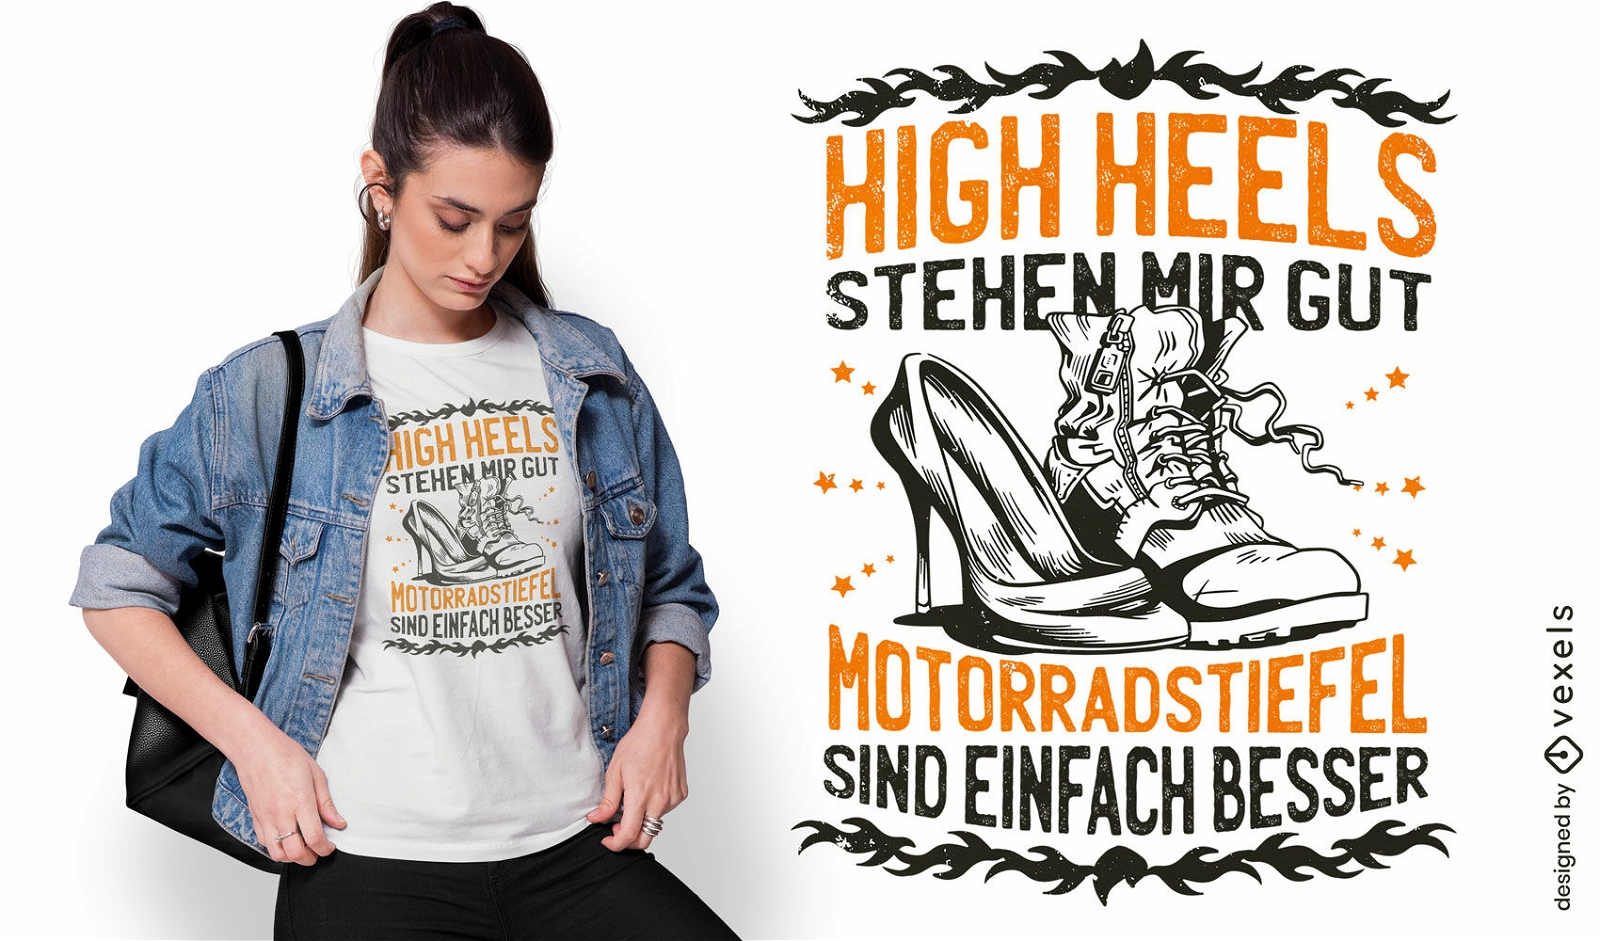 High heel and motorcycle boot t-shirt design